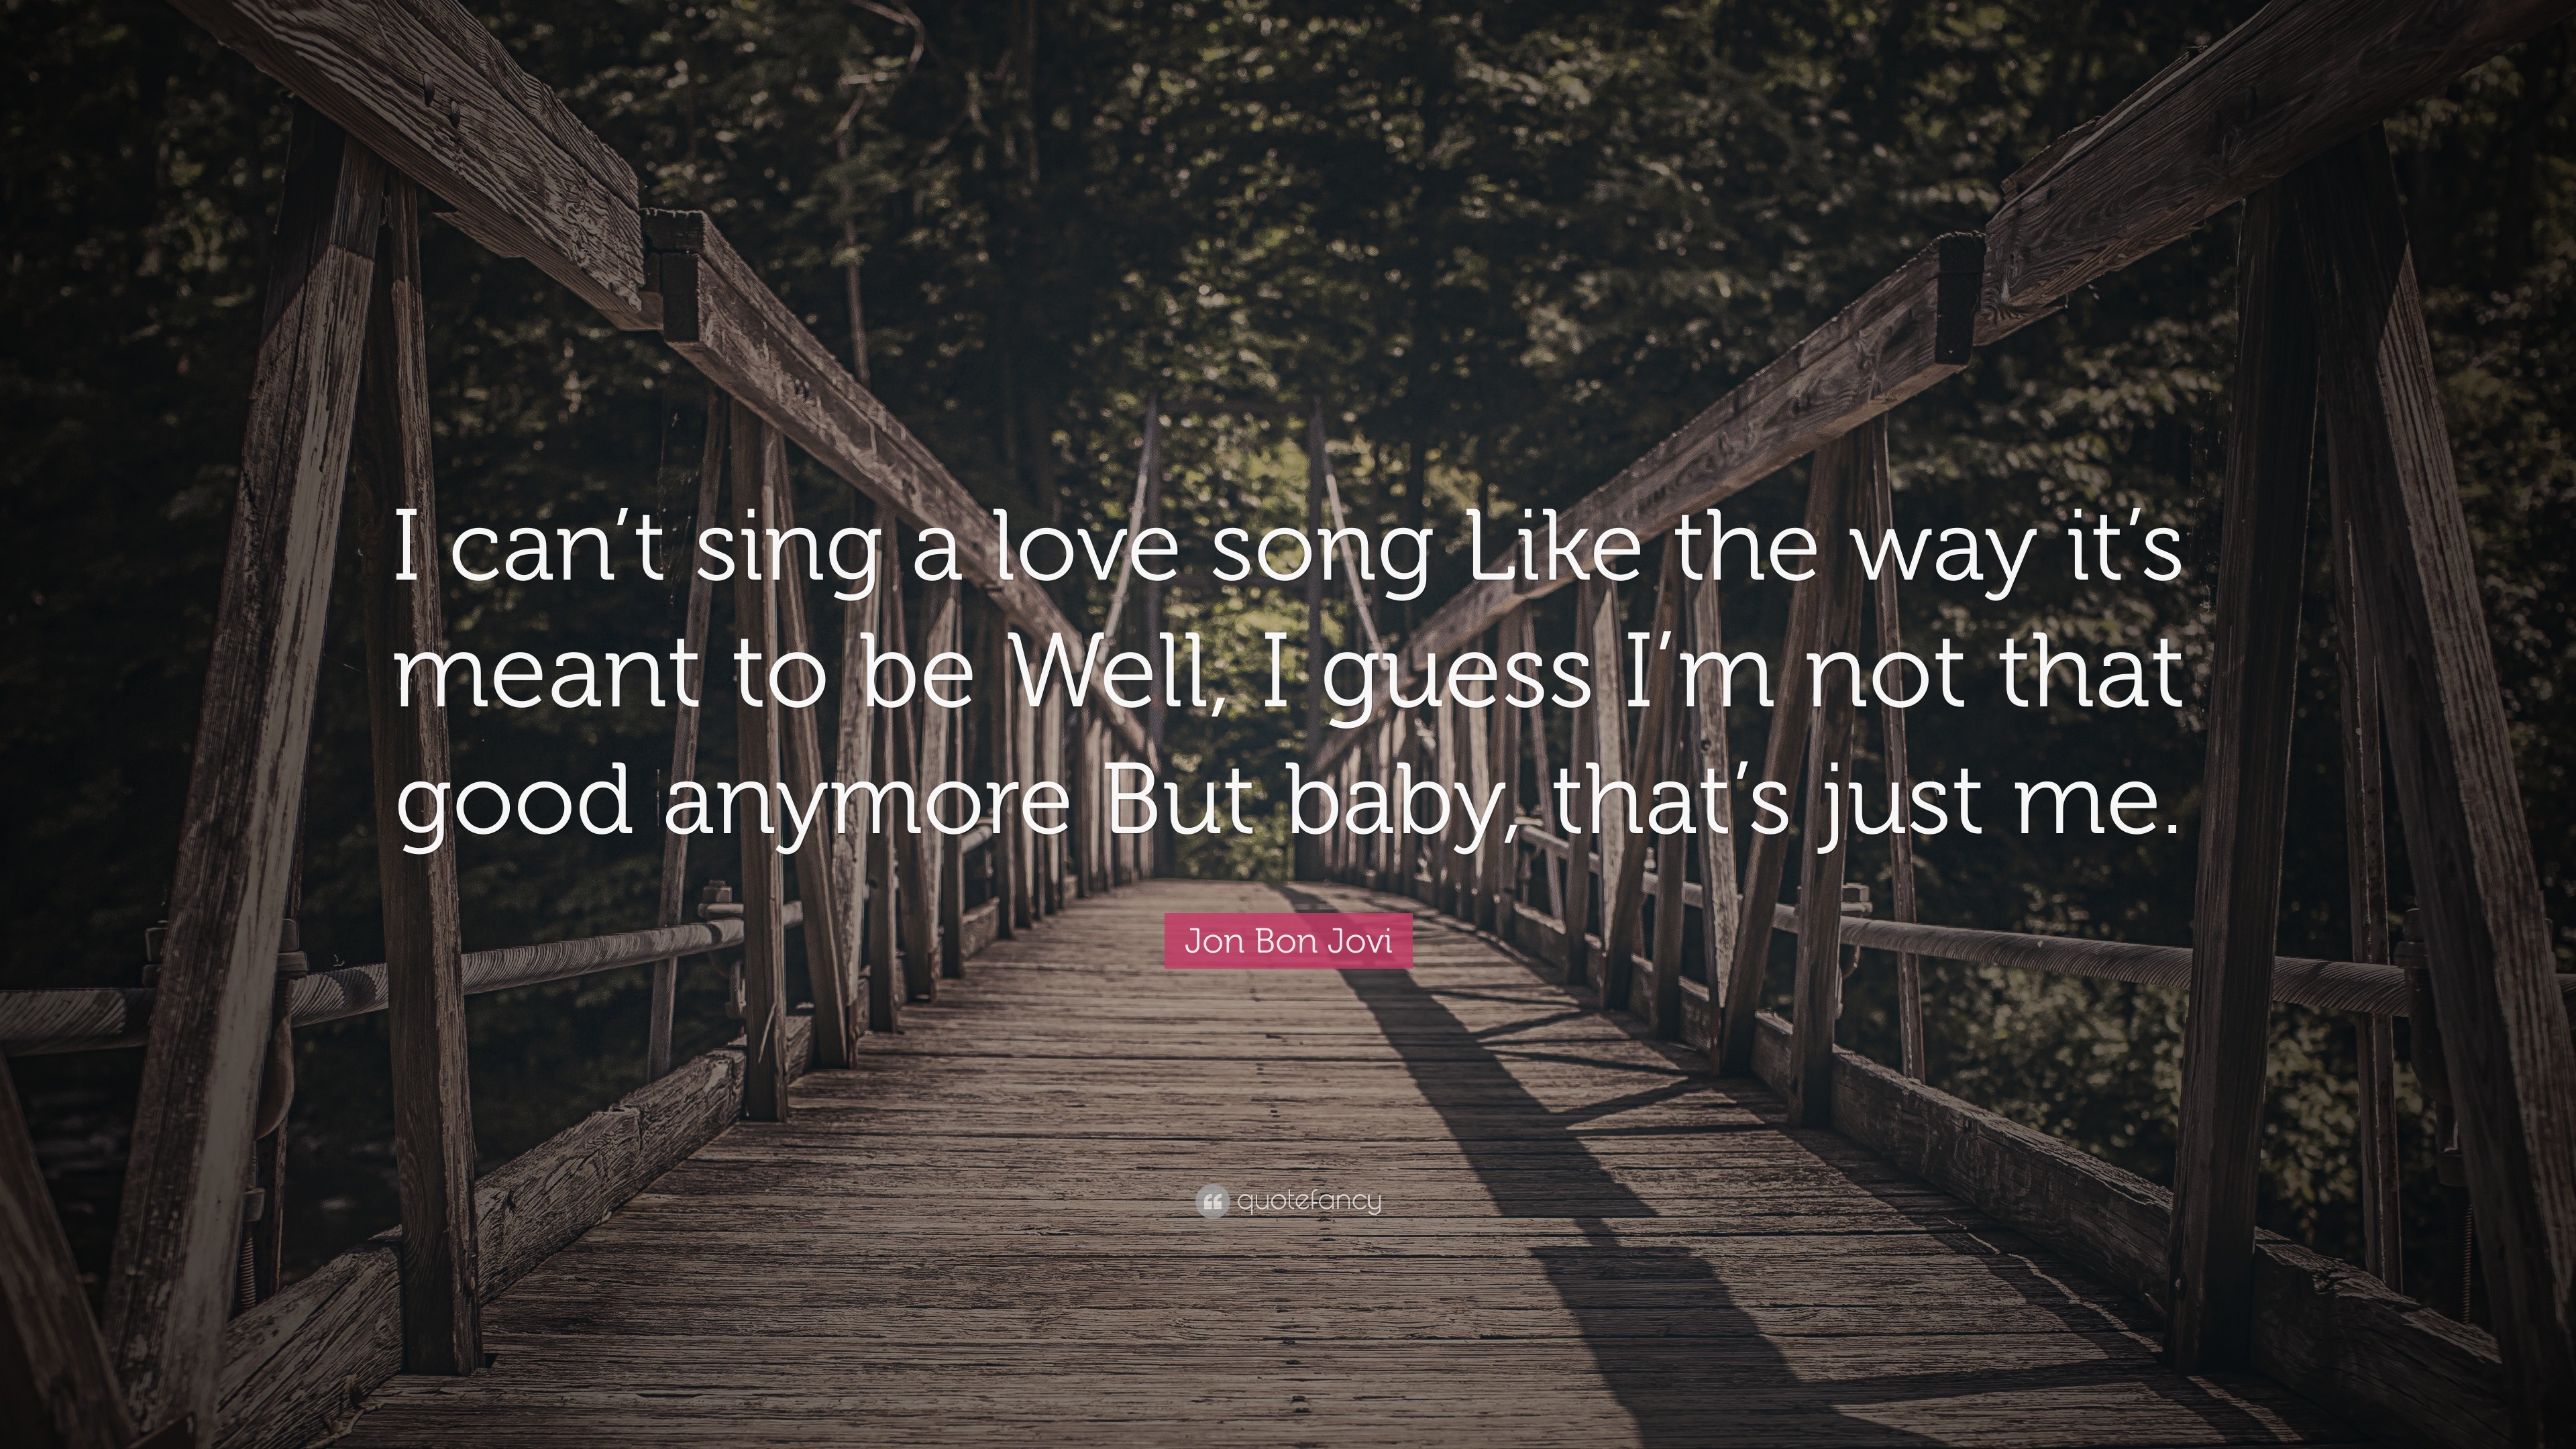 3840x2160 Jon Bon Jovi Quote: “I can't sing a love song Like the